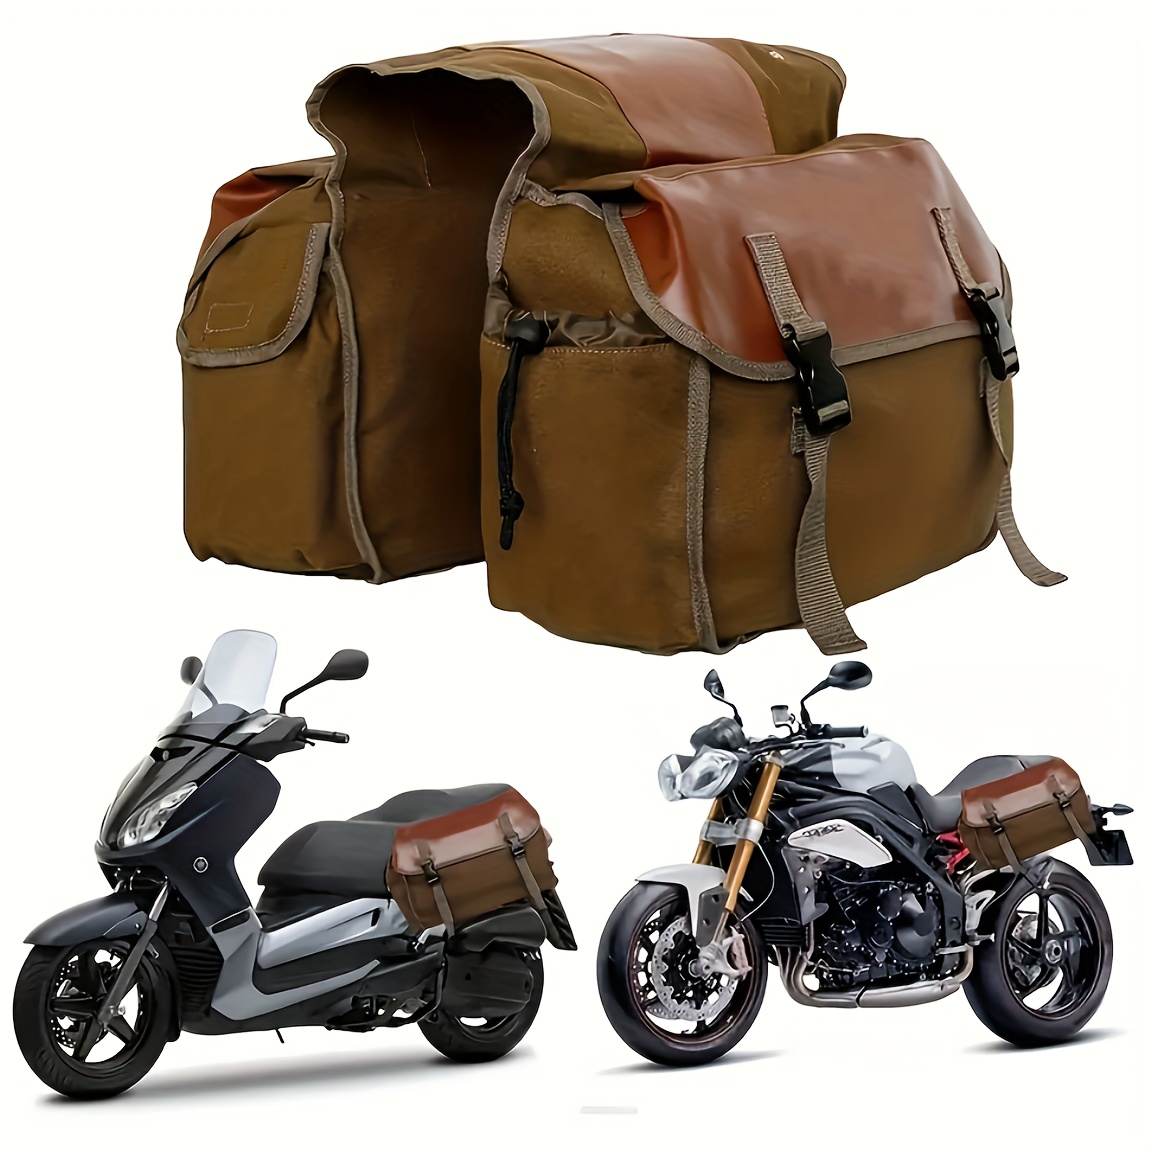 

Universal Motorcycle Bag With Large Capacity, Canvas Panniers Bags For Bicycle Bike Motor